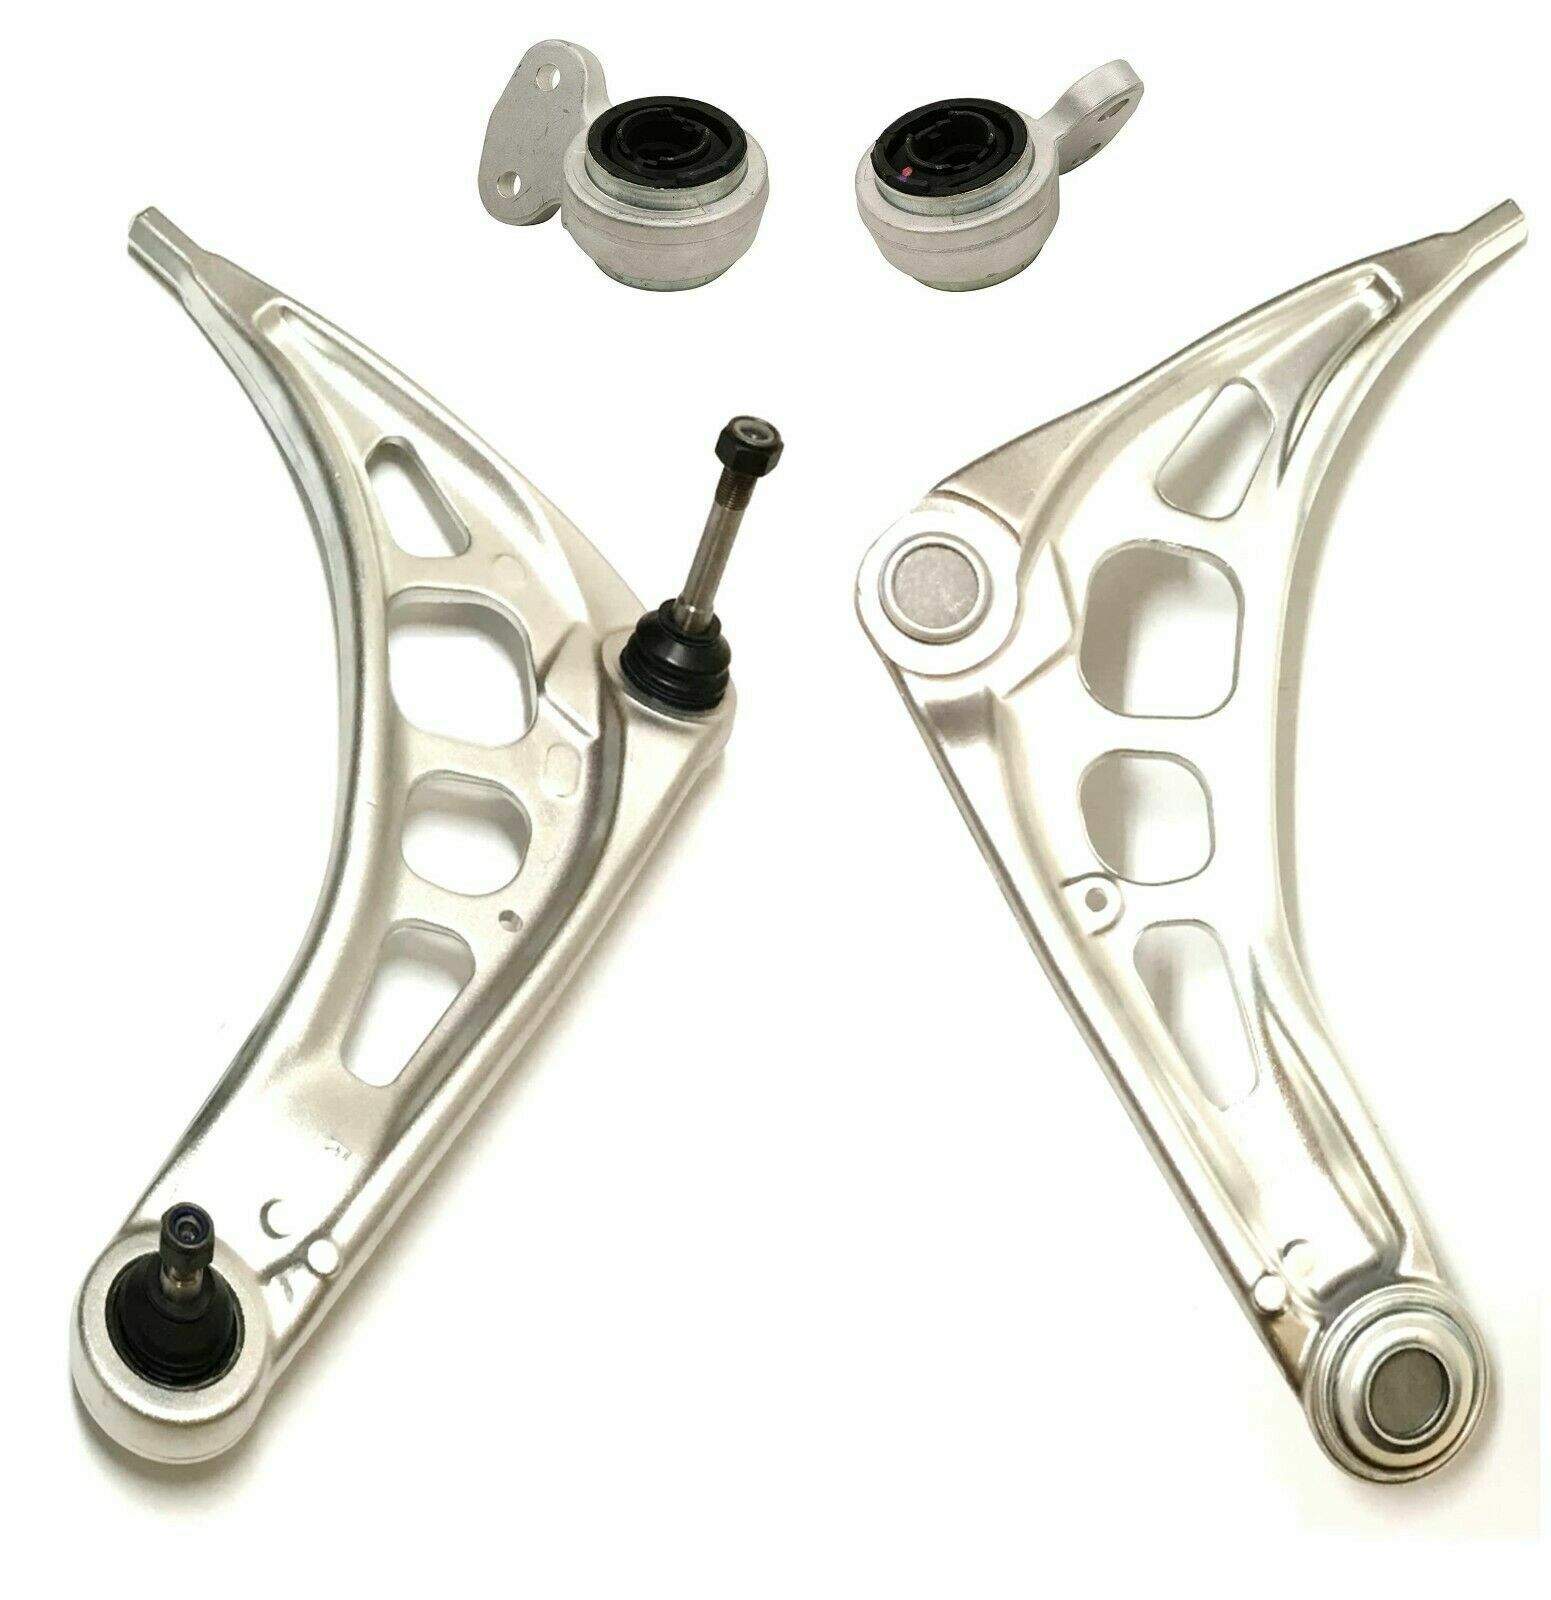 4 New Pc Front Lower Control Arms Kit for BMW E46 323i 325i 330Ci 328Ci 328iC Z4